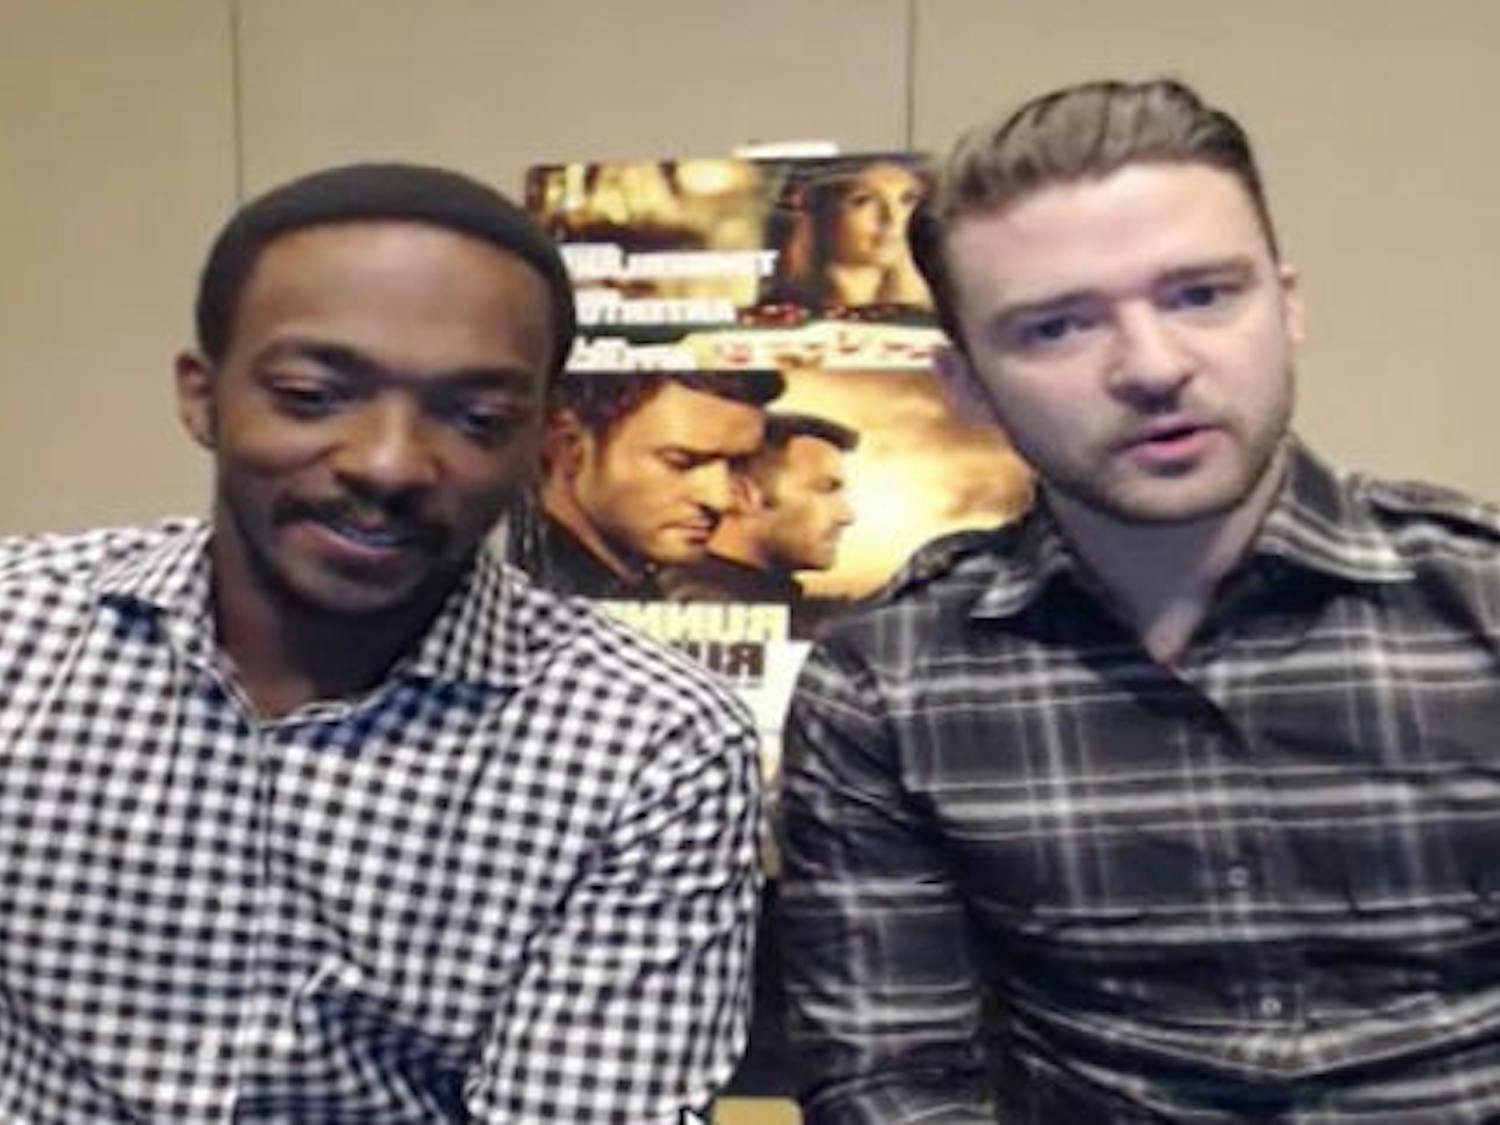 Justin Timberlake, right, and Anthony Mackie, left, speak with college students about the pair’s upcoming film “Runner, Runner” on Sept. 18 in a Google Hangout.